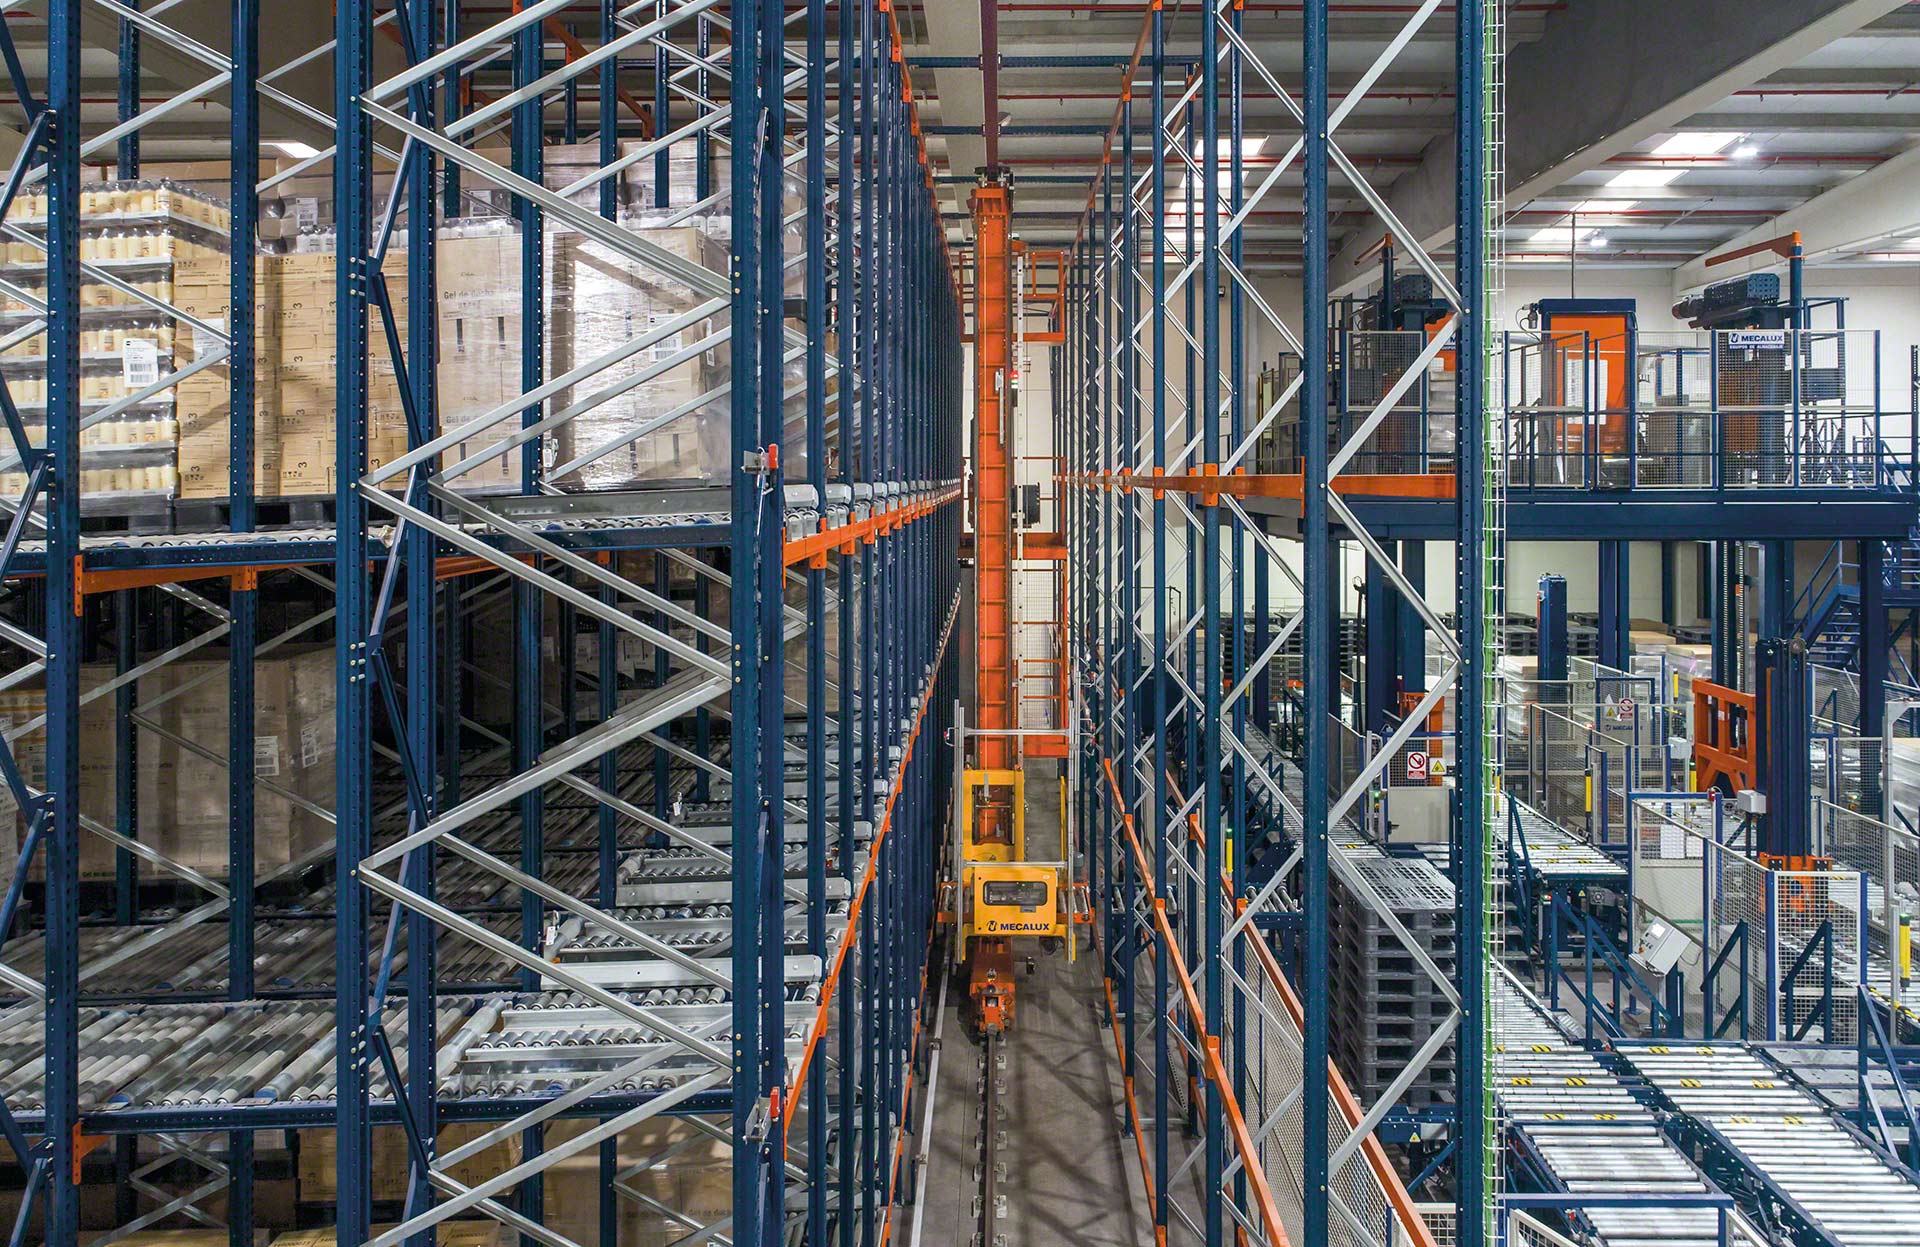 Stacker cranes can be used in conjunction with conveyors to automate pallet transport